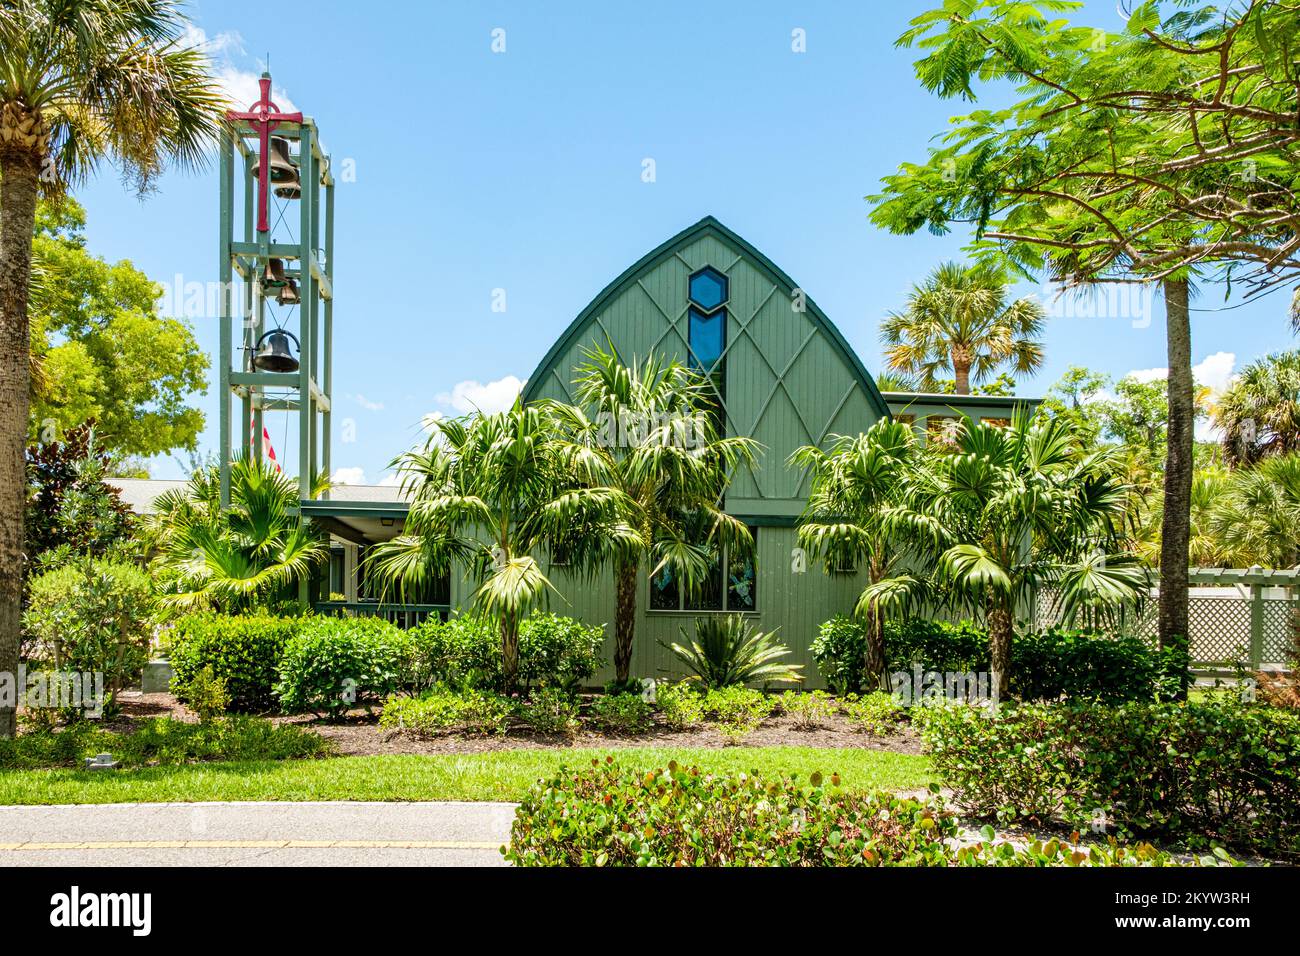 St Michael and All Angels Episcopal Church, Periwinkle Way, Sanibel, Florida Stock Photo